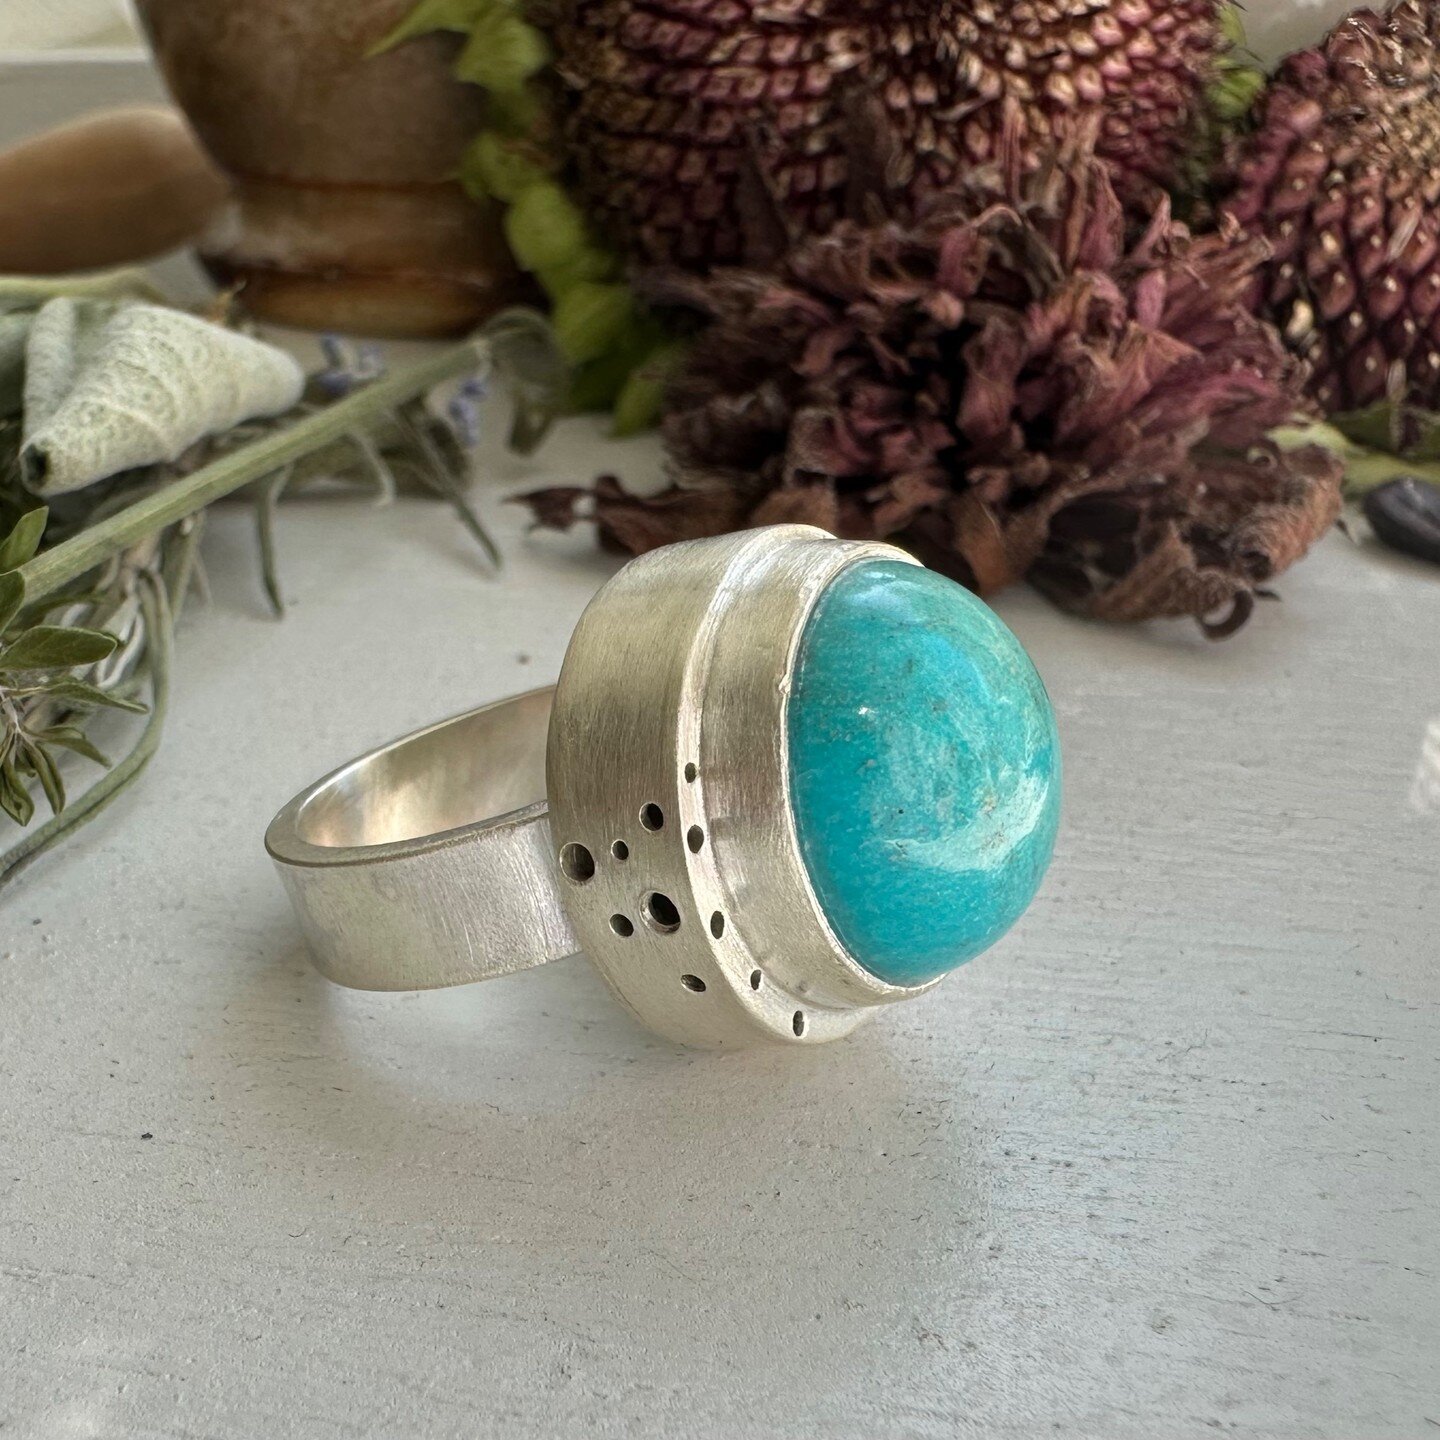 Hollow form love. Turquoise set in sterling silver. #silver #silversmith #silverring #metalsmith #statementring #oneofakindring #artisanjewelry #turquoisejewelry #turquoisering